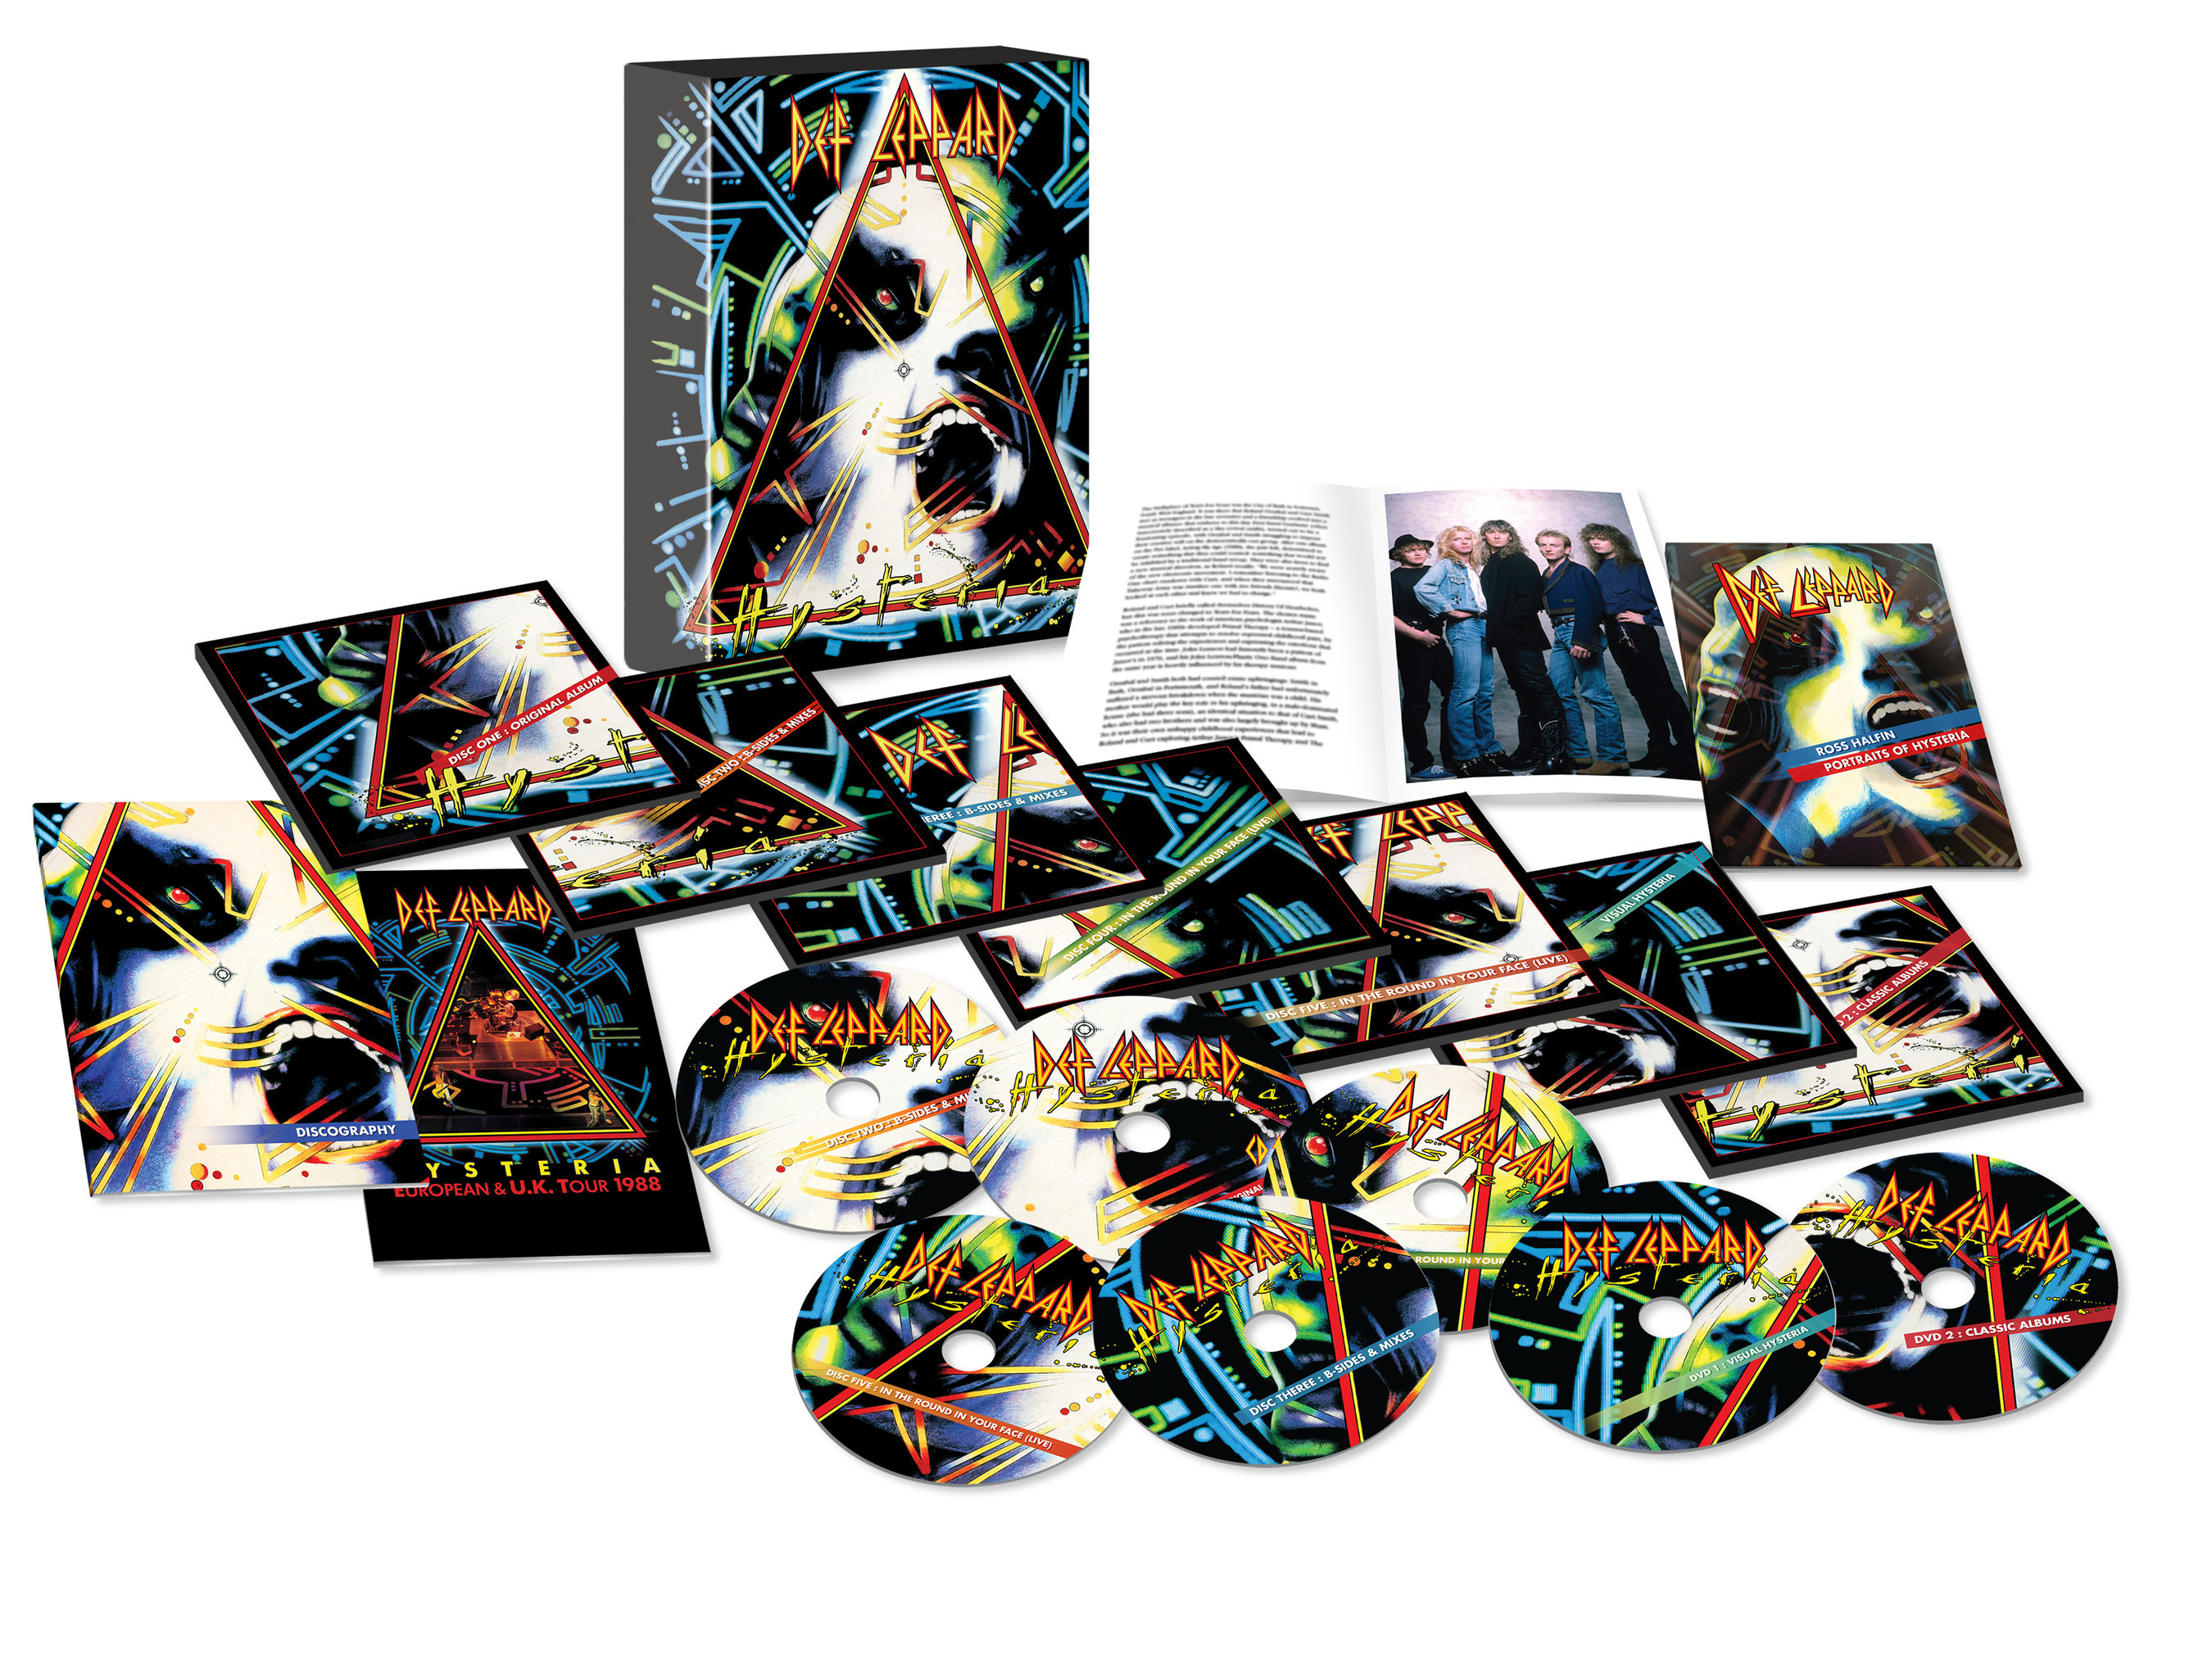 30th Anniversary Multi Format Release Of Hysteria Remastered 2017